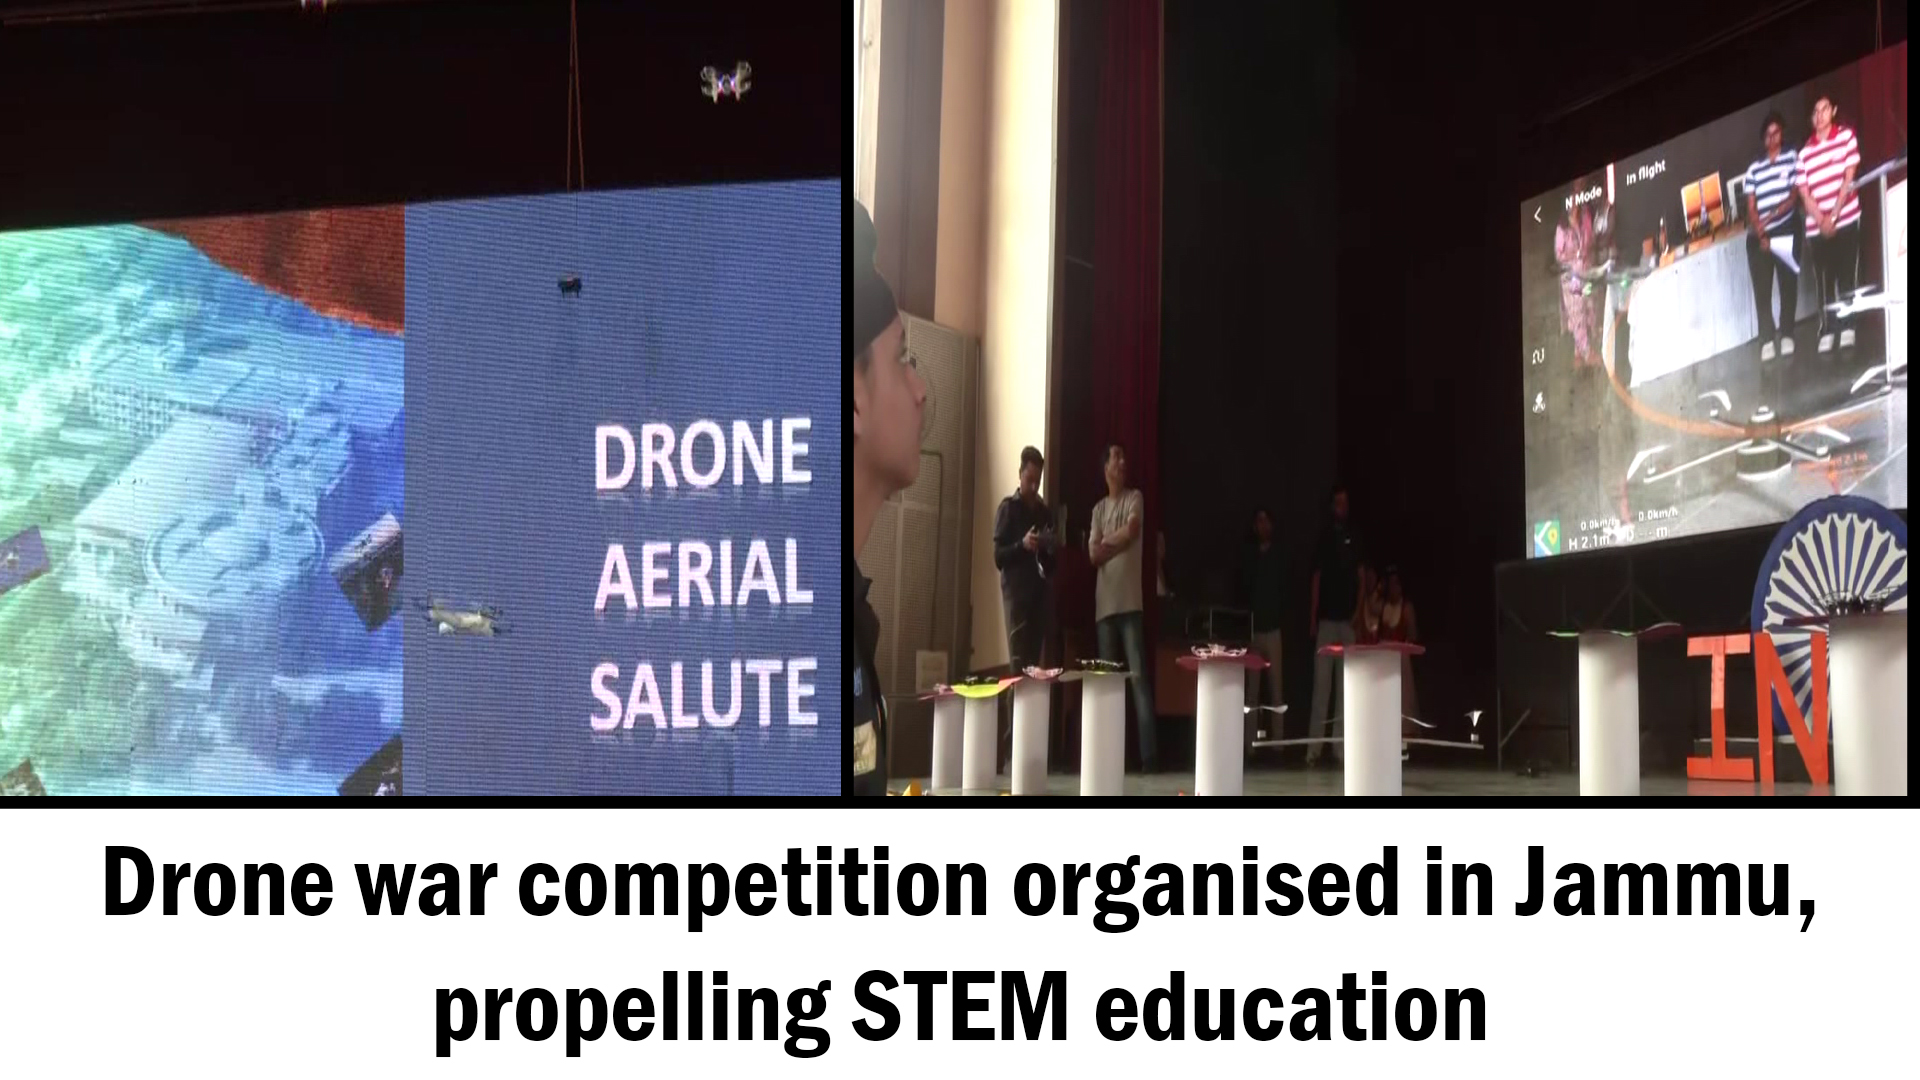 Drone war competition organised in Jammu, propelling STEM education